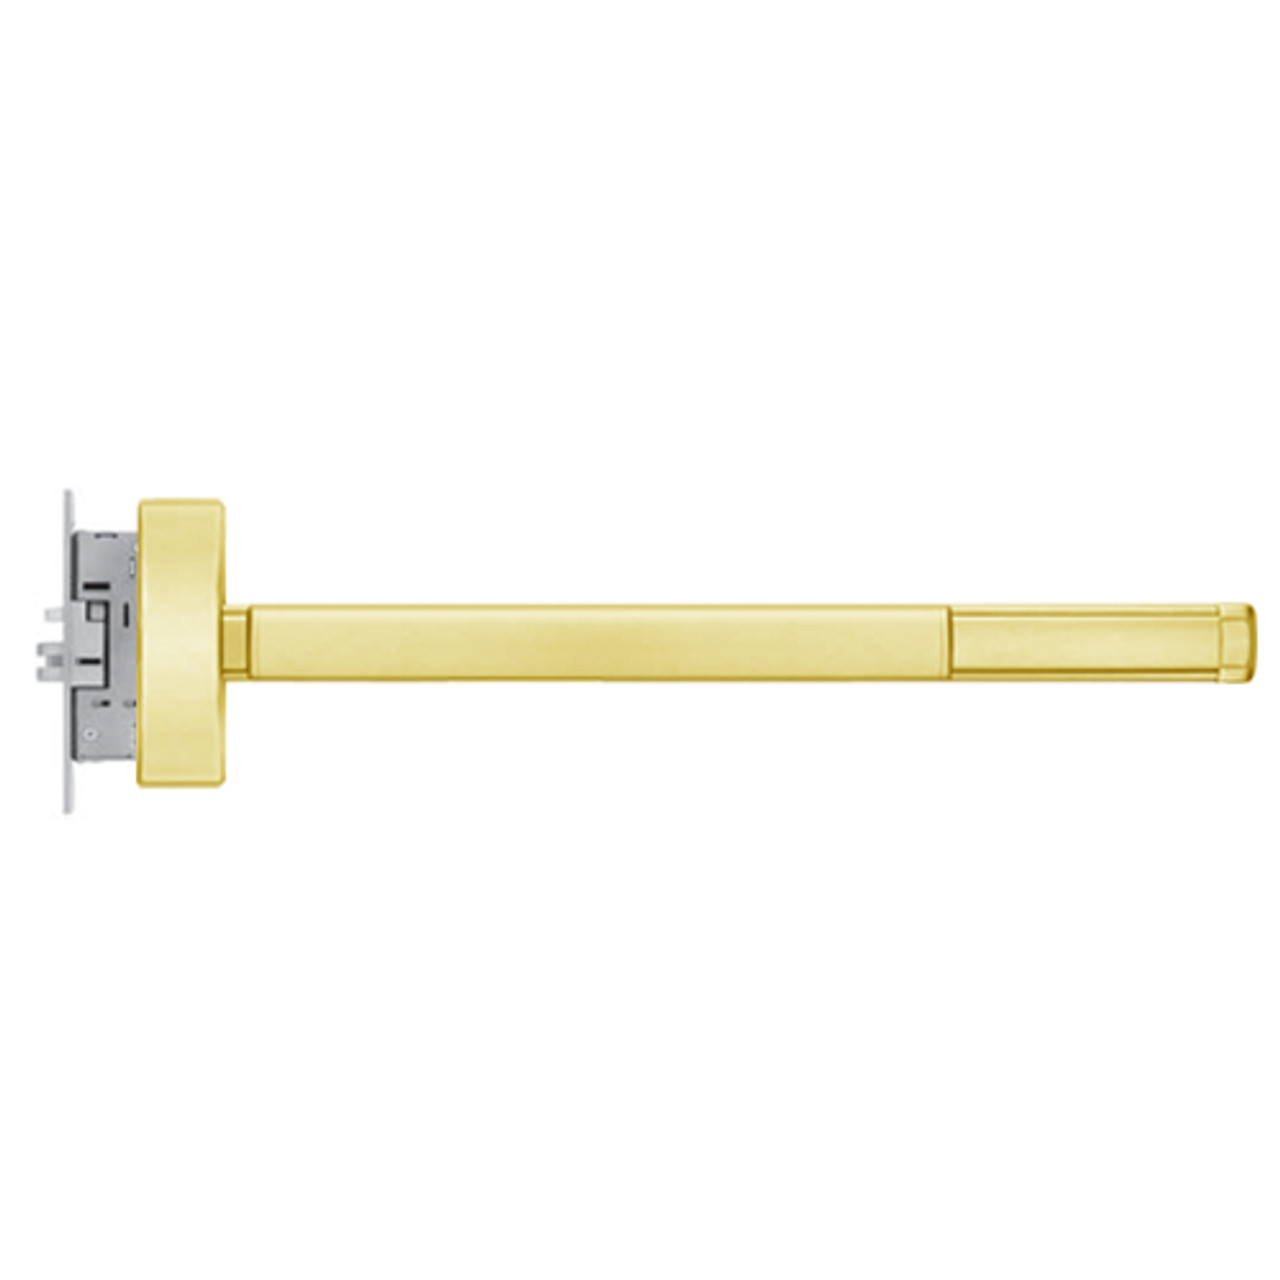 ELRFL2303-RHR-605-48 PHI 2300 Series Fire Rated Apex Mortise Exit Device with Electric Latch Retraction Prepped for Key Retracts Latchbolt in Bright Brass Finish